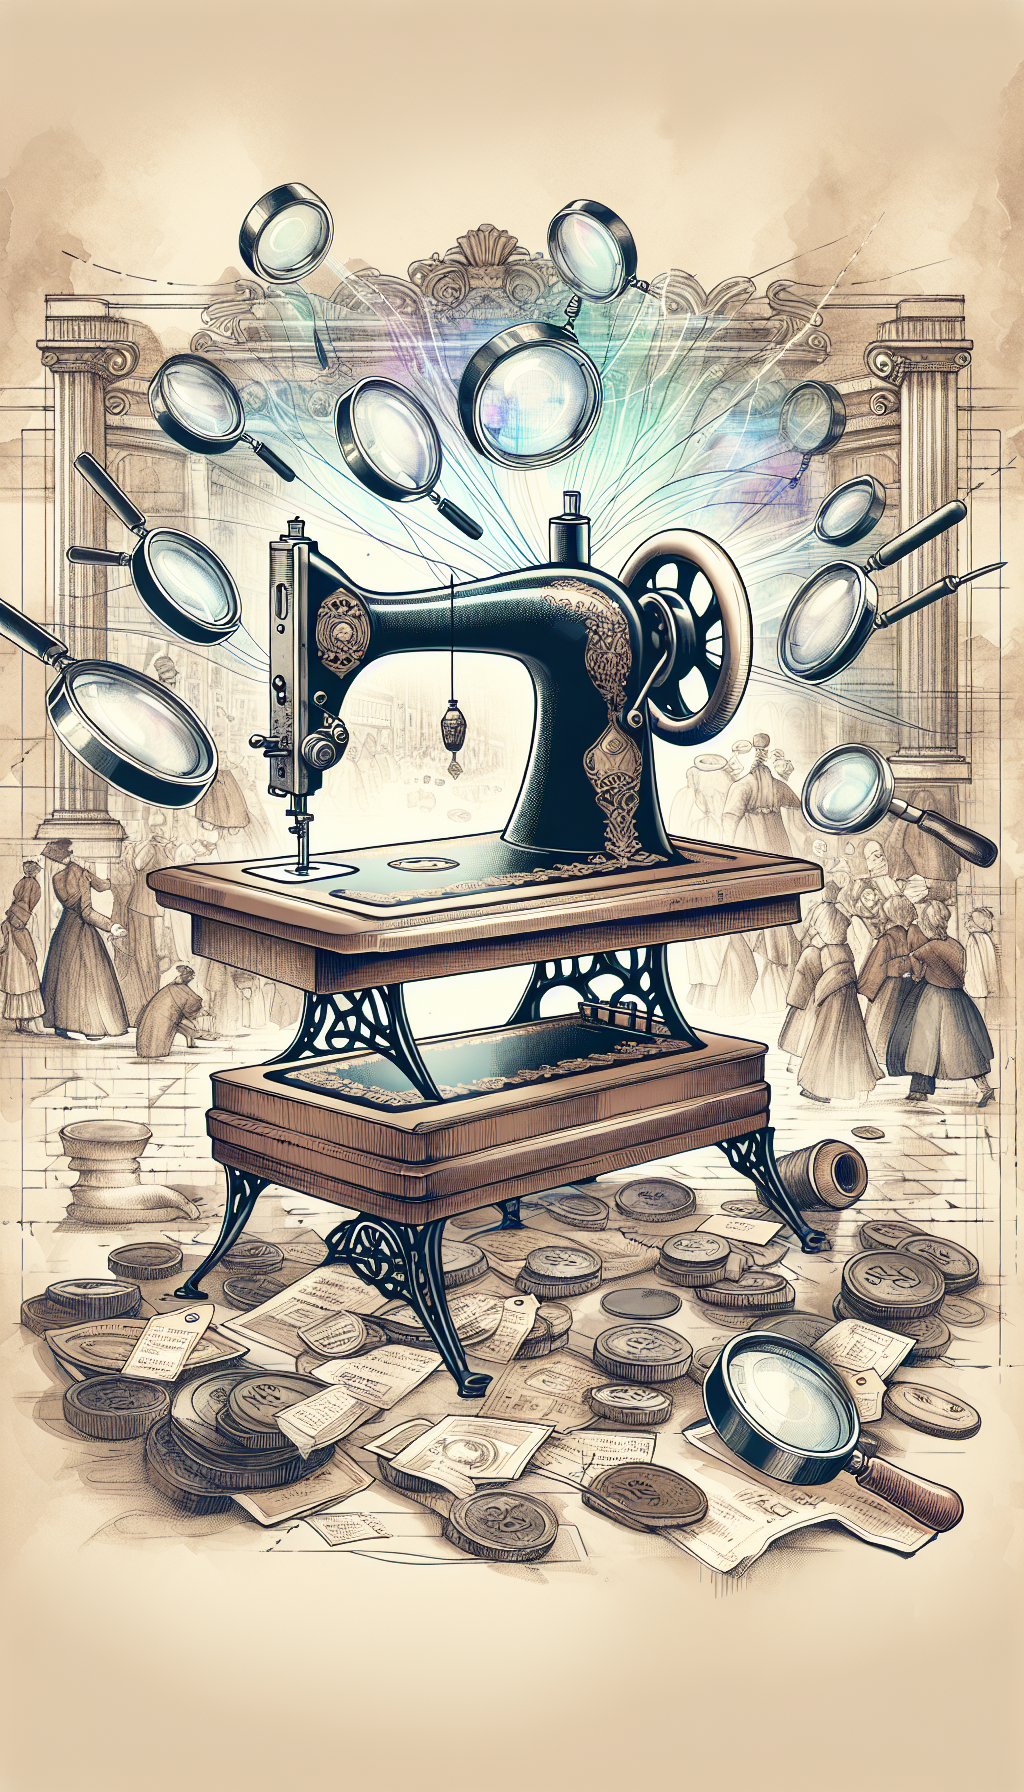 An illustration presents an ornate, antique Singer sewing machine resting on a pedestal. Magnifying glasses hover above, dissecting glowing, ethereal streams representing rarity and demand that swirl upward from the machine. Scattered around are faded price tags escalating in value, while behind, a baroque-style frame encloses a bustling vintage market scene. The artwork blends line art with watercolor textures to emphasize contrast.